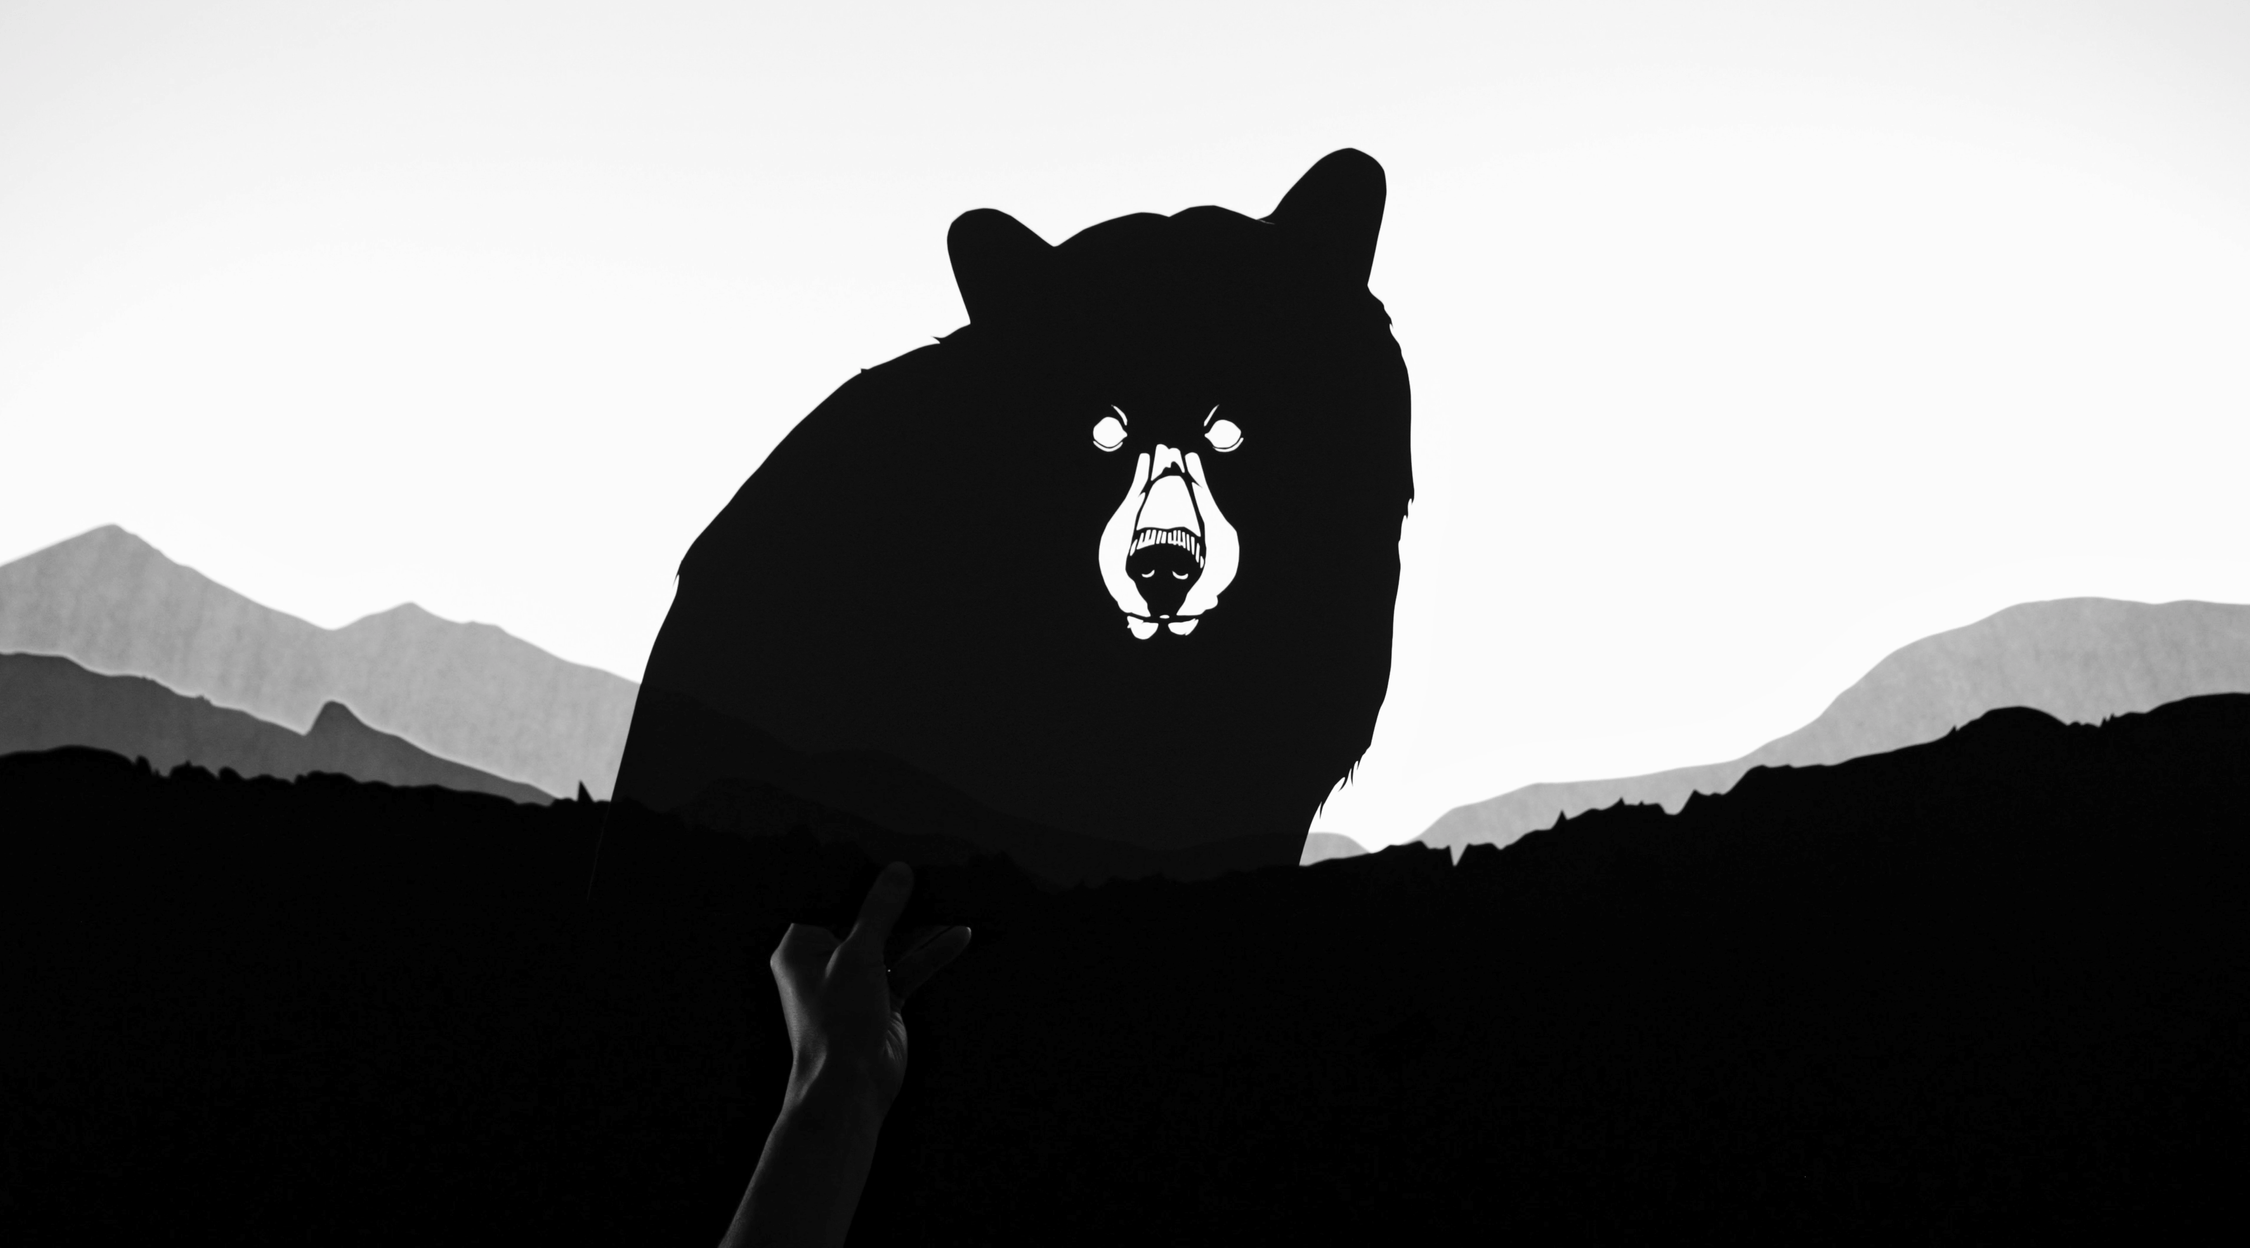 Silhouetted against a light sky with faint mountain outlines, there is a large, stylized black cutout of a bear with white accents for the bear's eyes, nose, and mouth, giving it a stark, graphic appearance. In the lower left corner, a human hand is visible, holding the bottom edge of the bear silhouette.